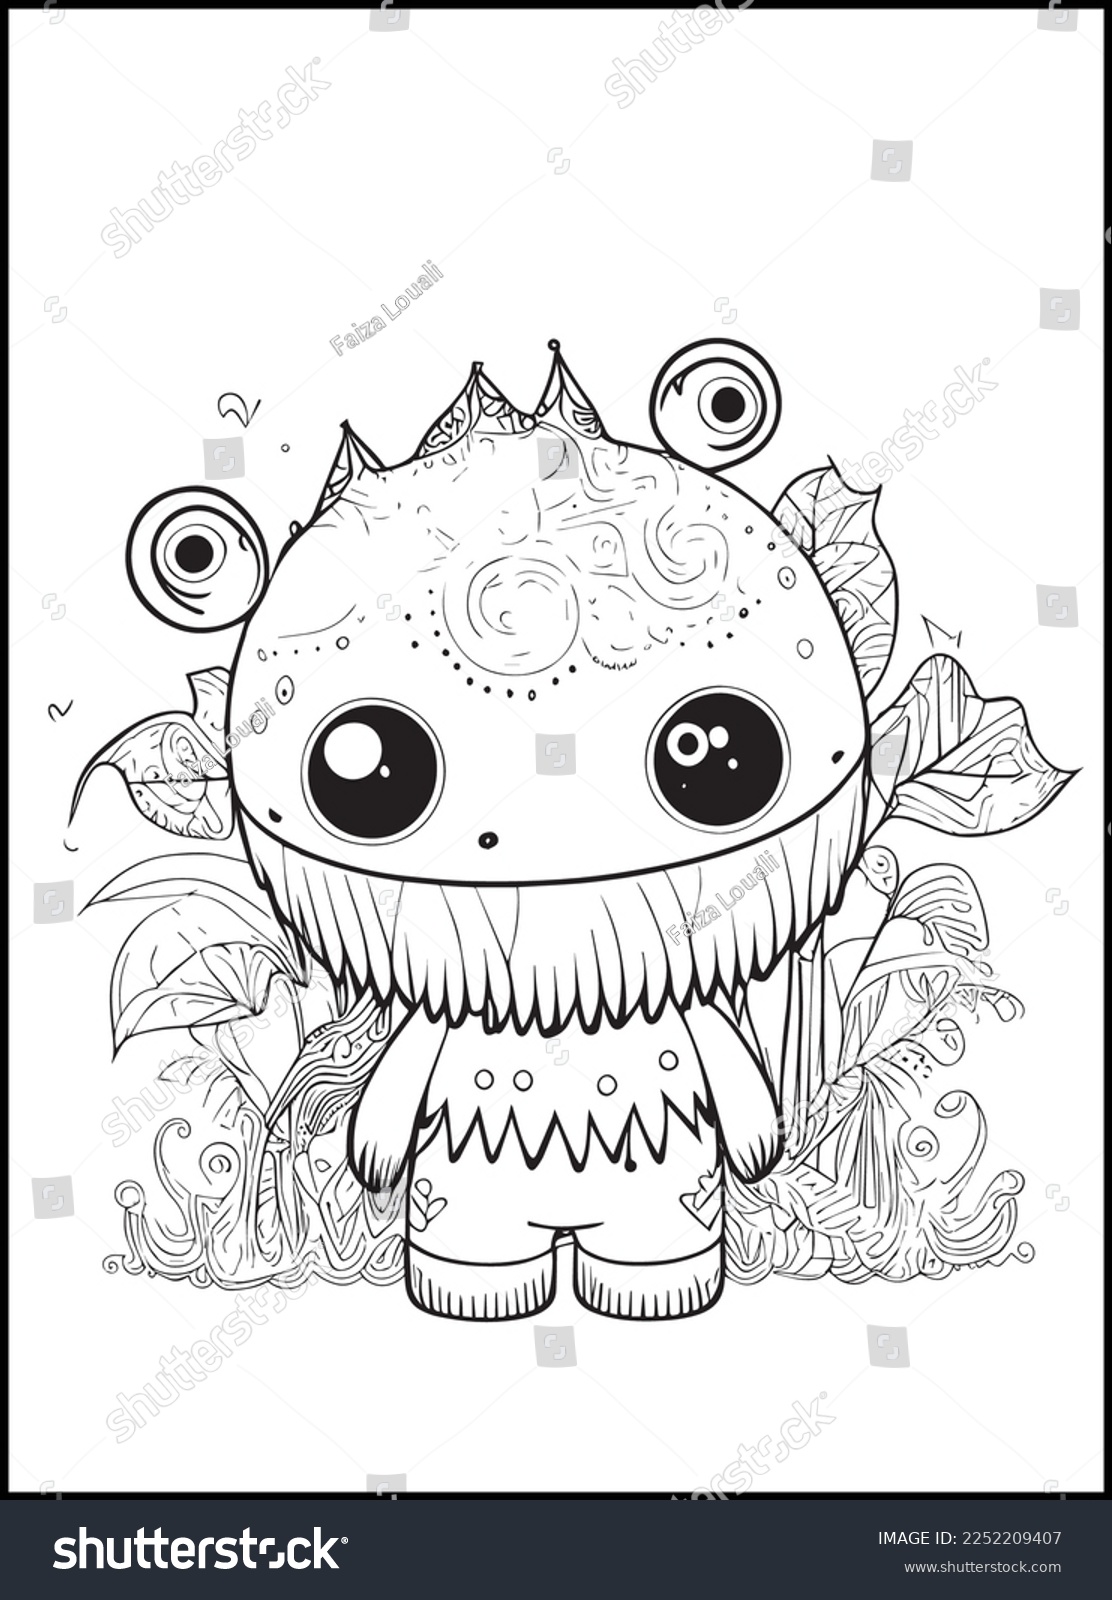 Cute monster coloring pages kids stock vector royalty free